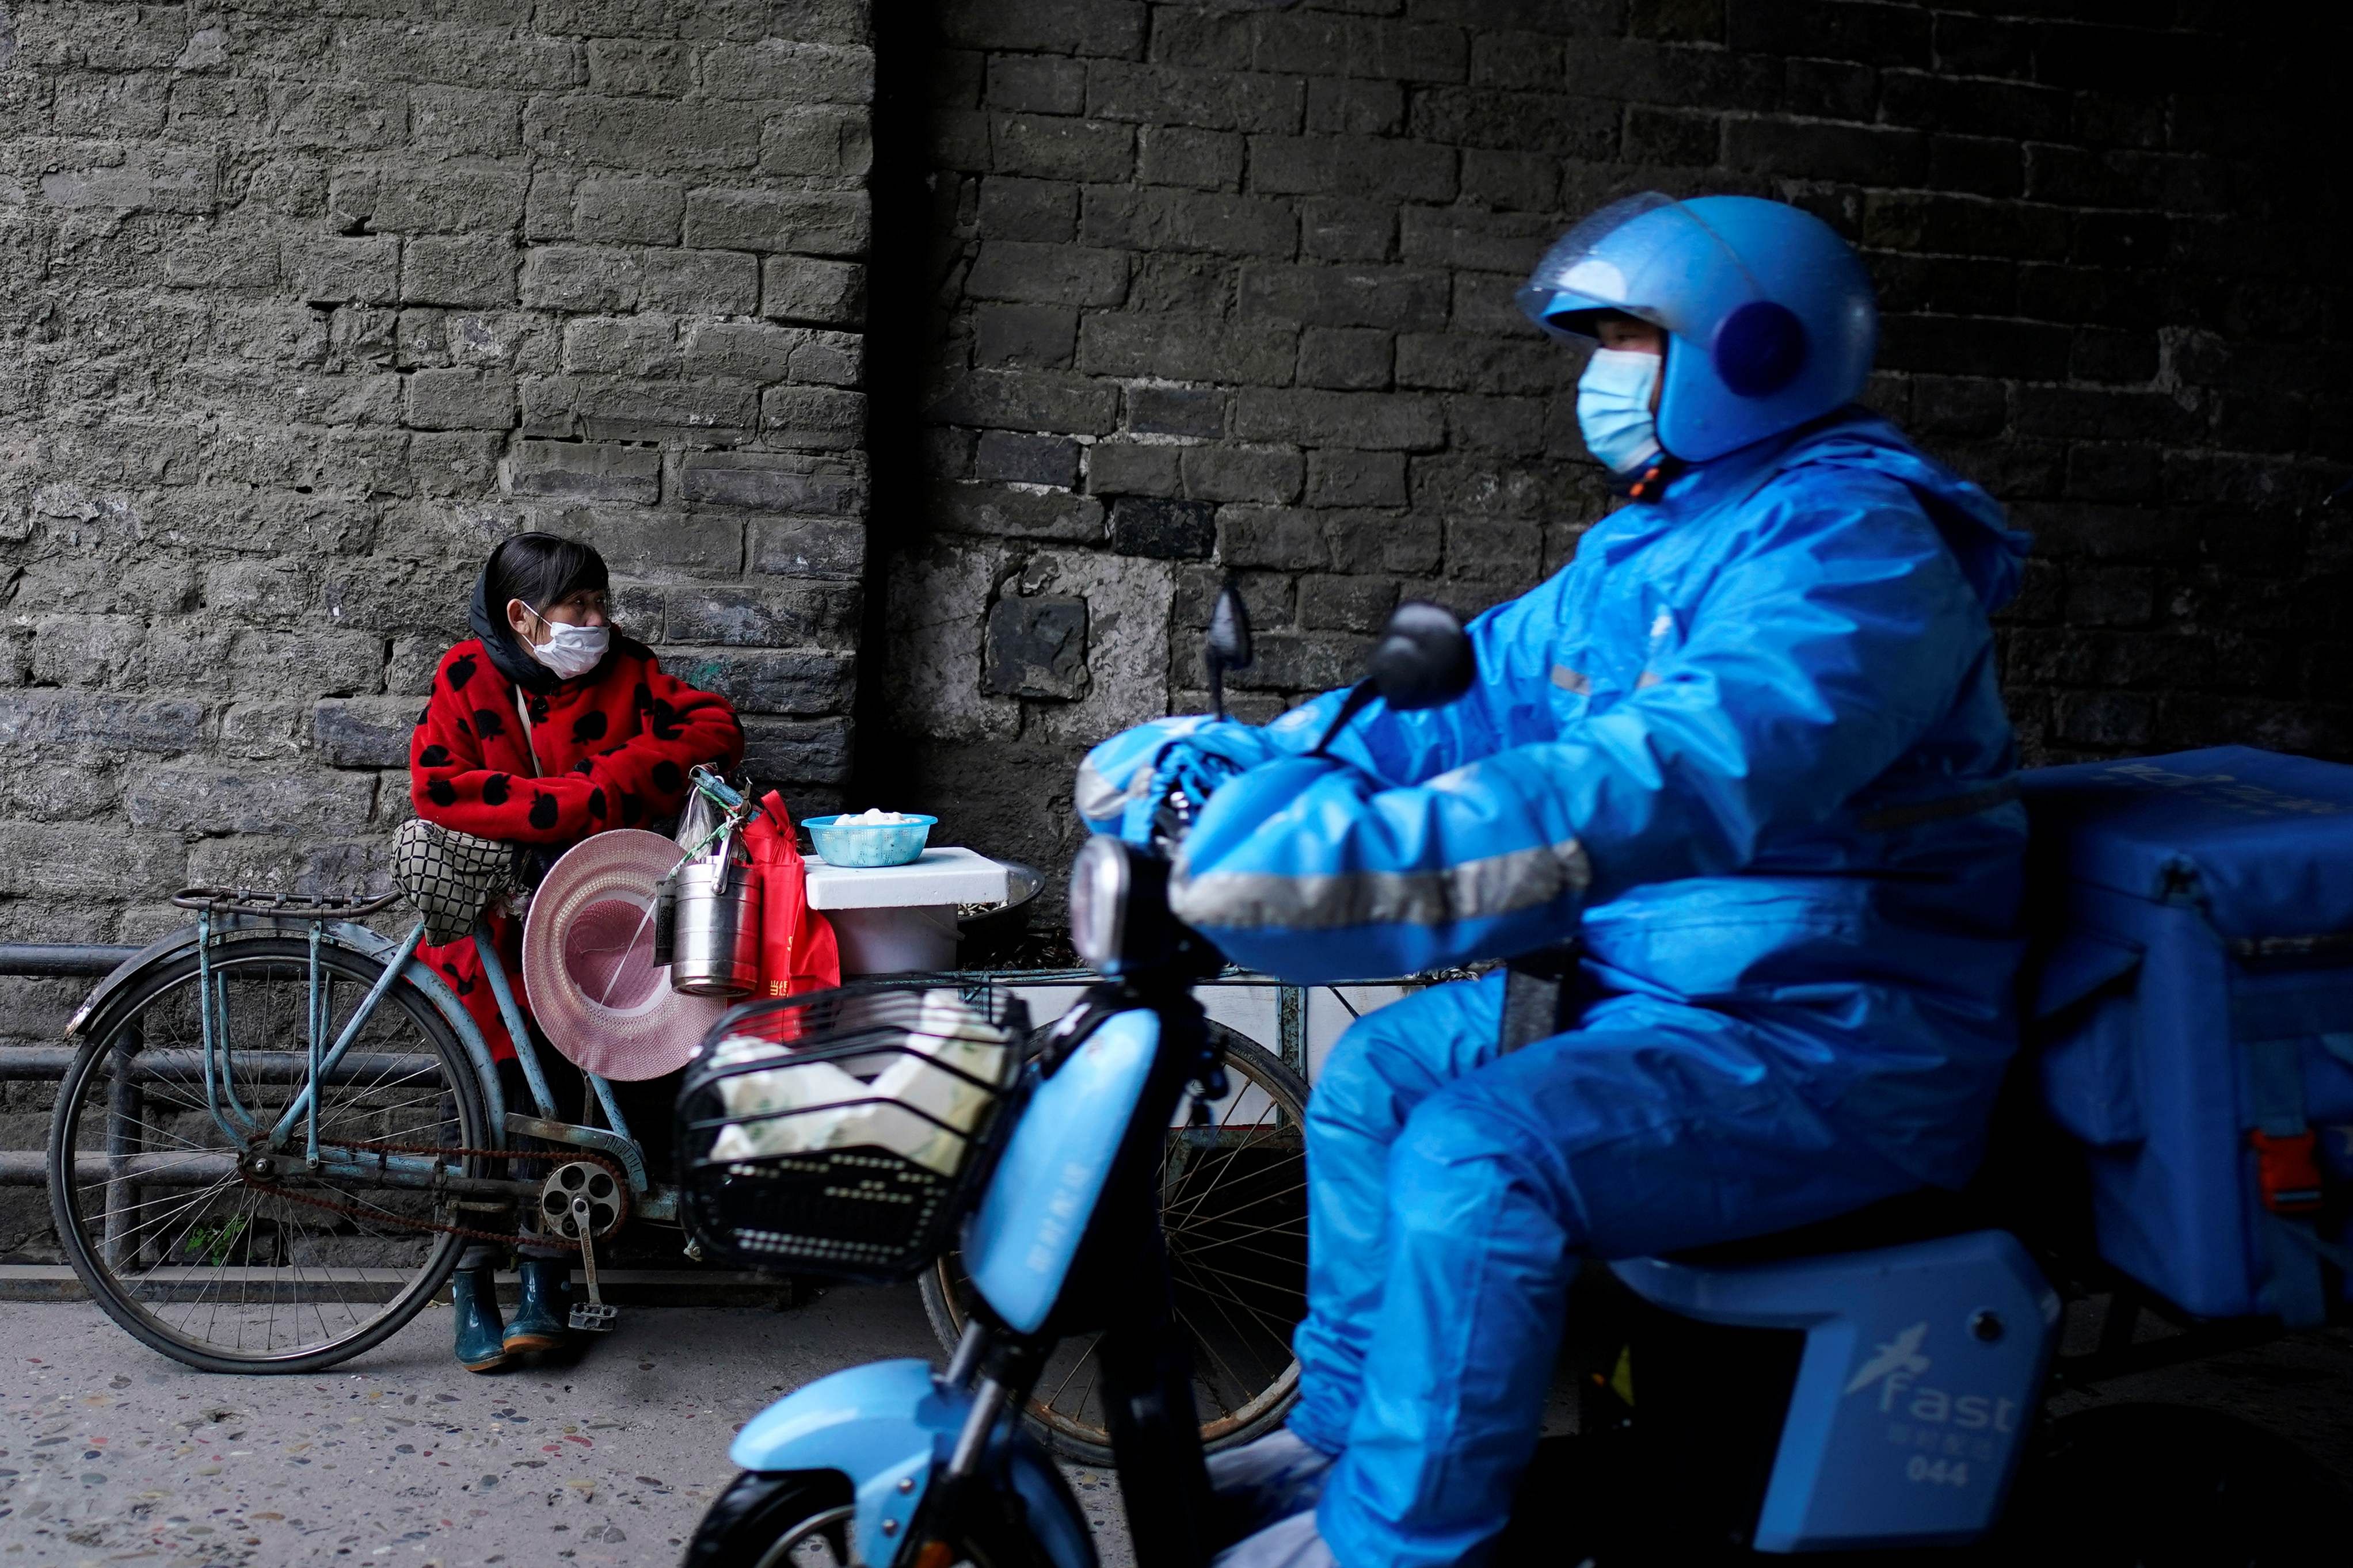 A delivery worker rides a vehicle past a vendor waiting for customers in Jingzhou, after the lockdown was eased in Hubei province. (Credit: Reuters)